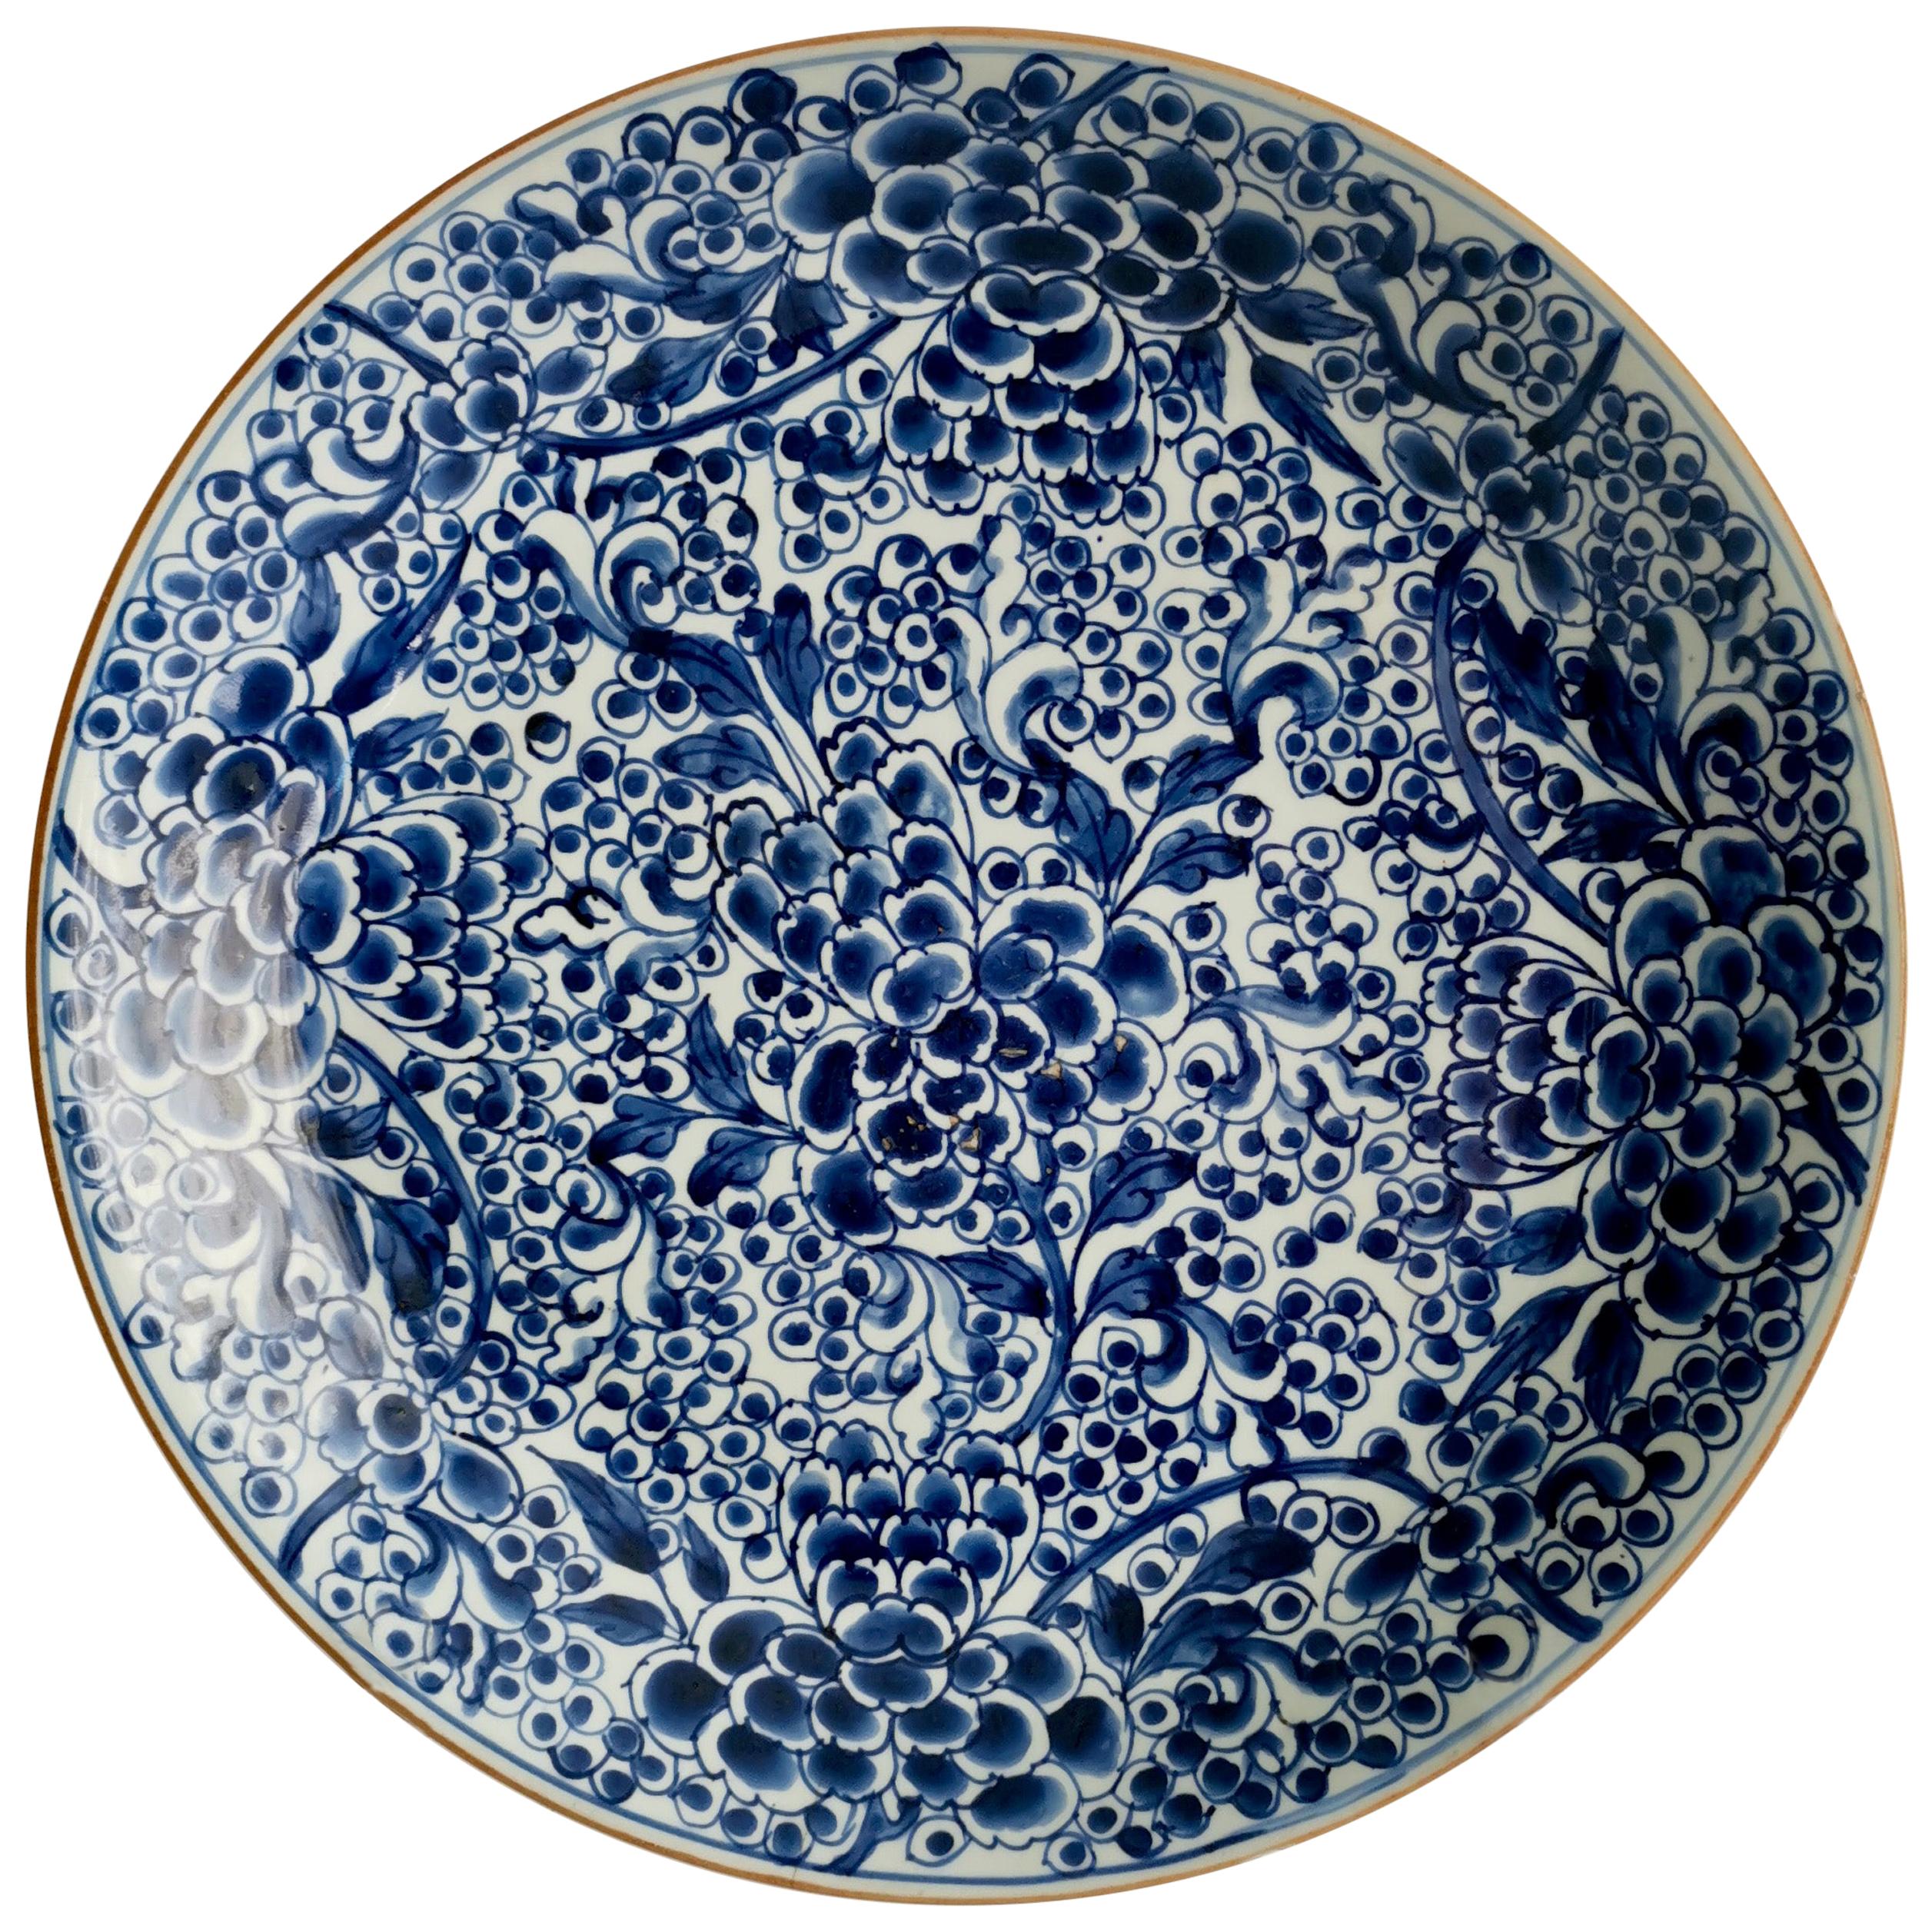 Chinese Export Porcelain Charger, Blue on White Peony & Frogspawn, Kangxi 18th C